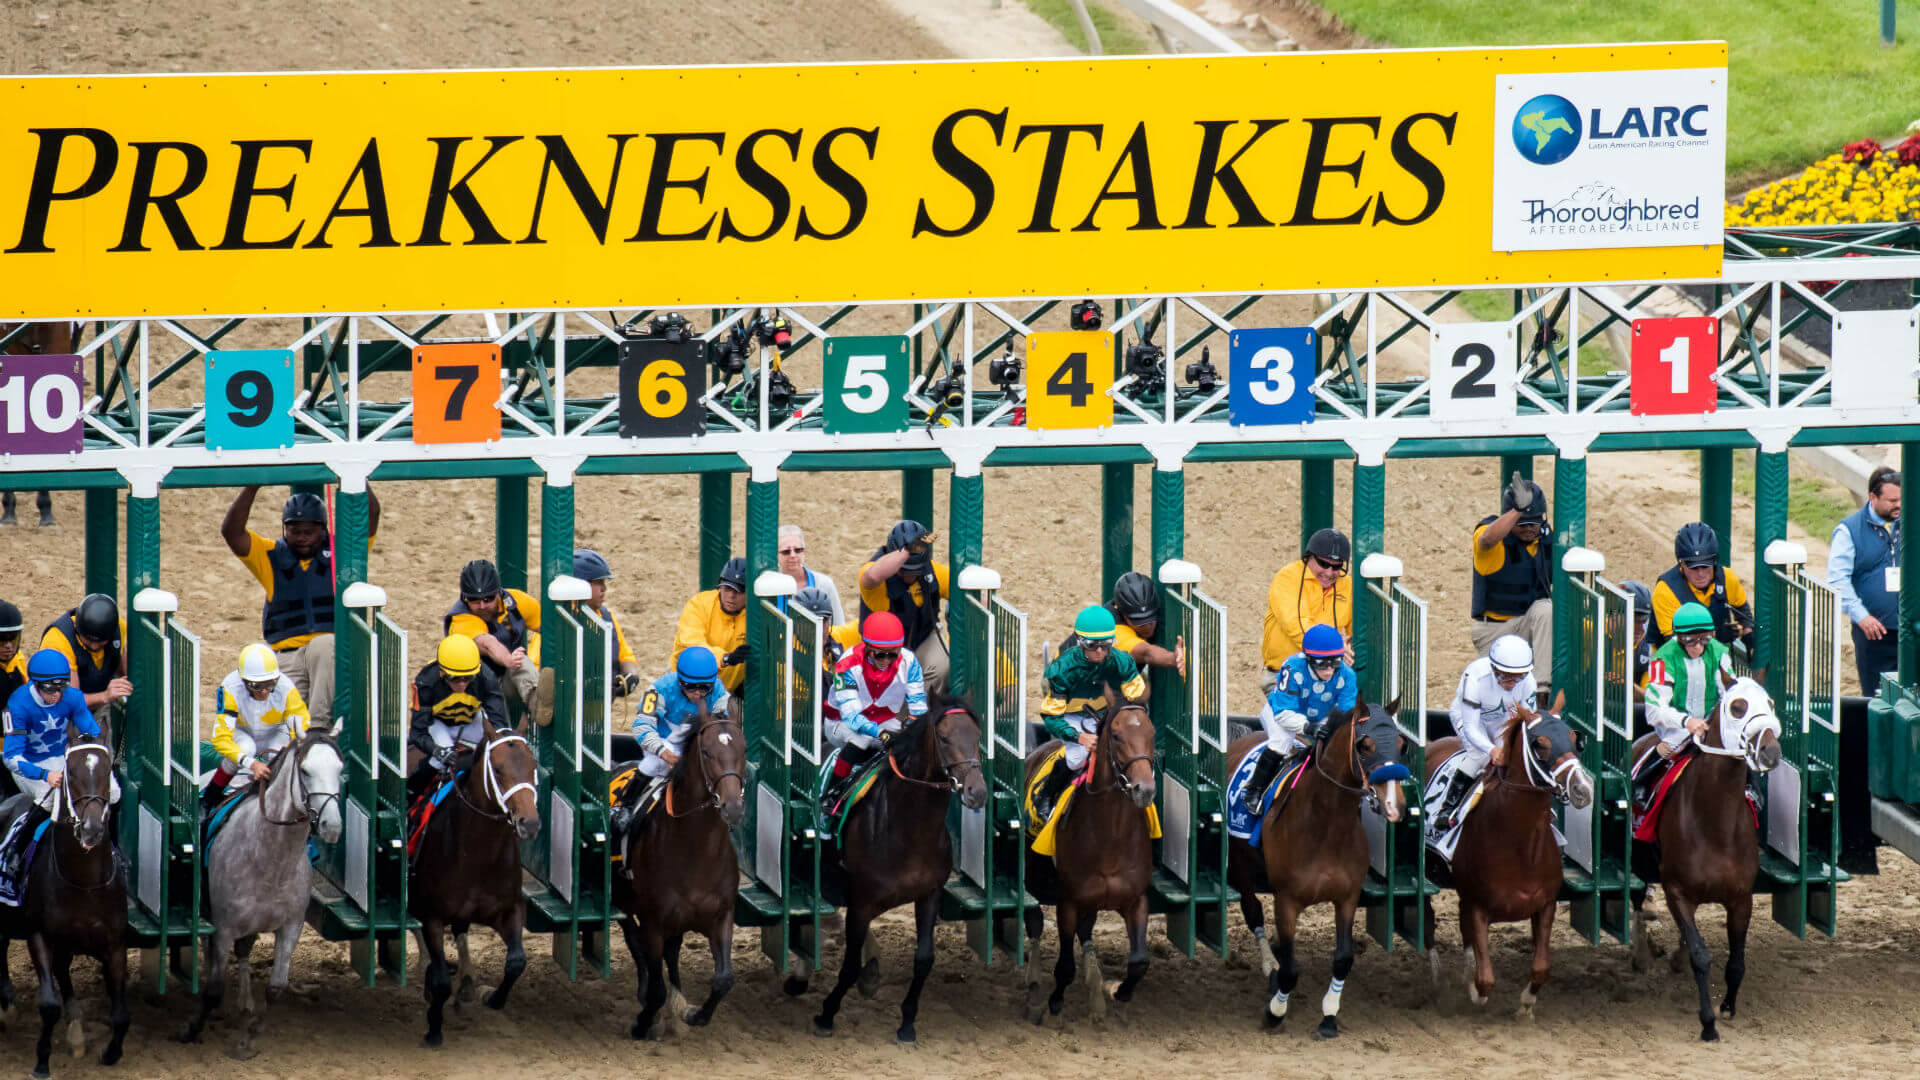 preakness stakes odds